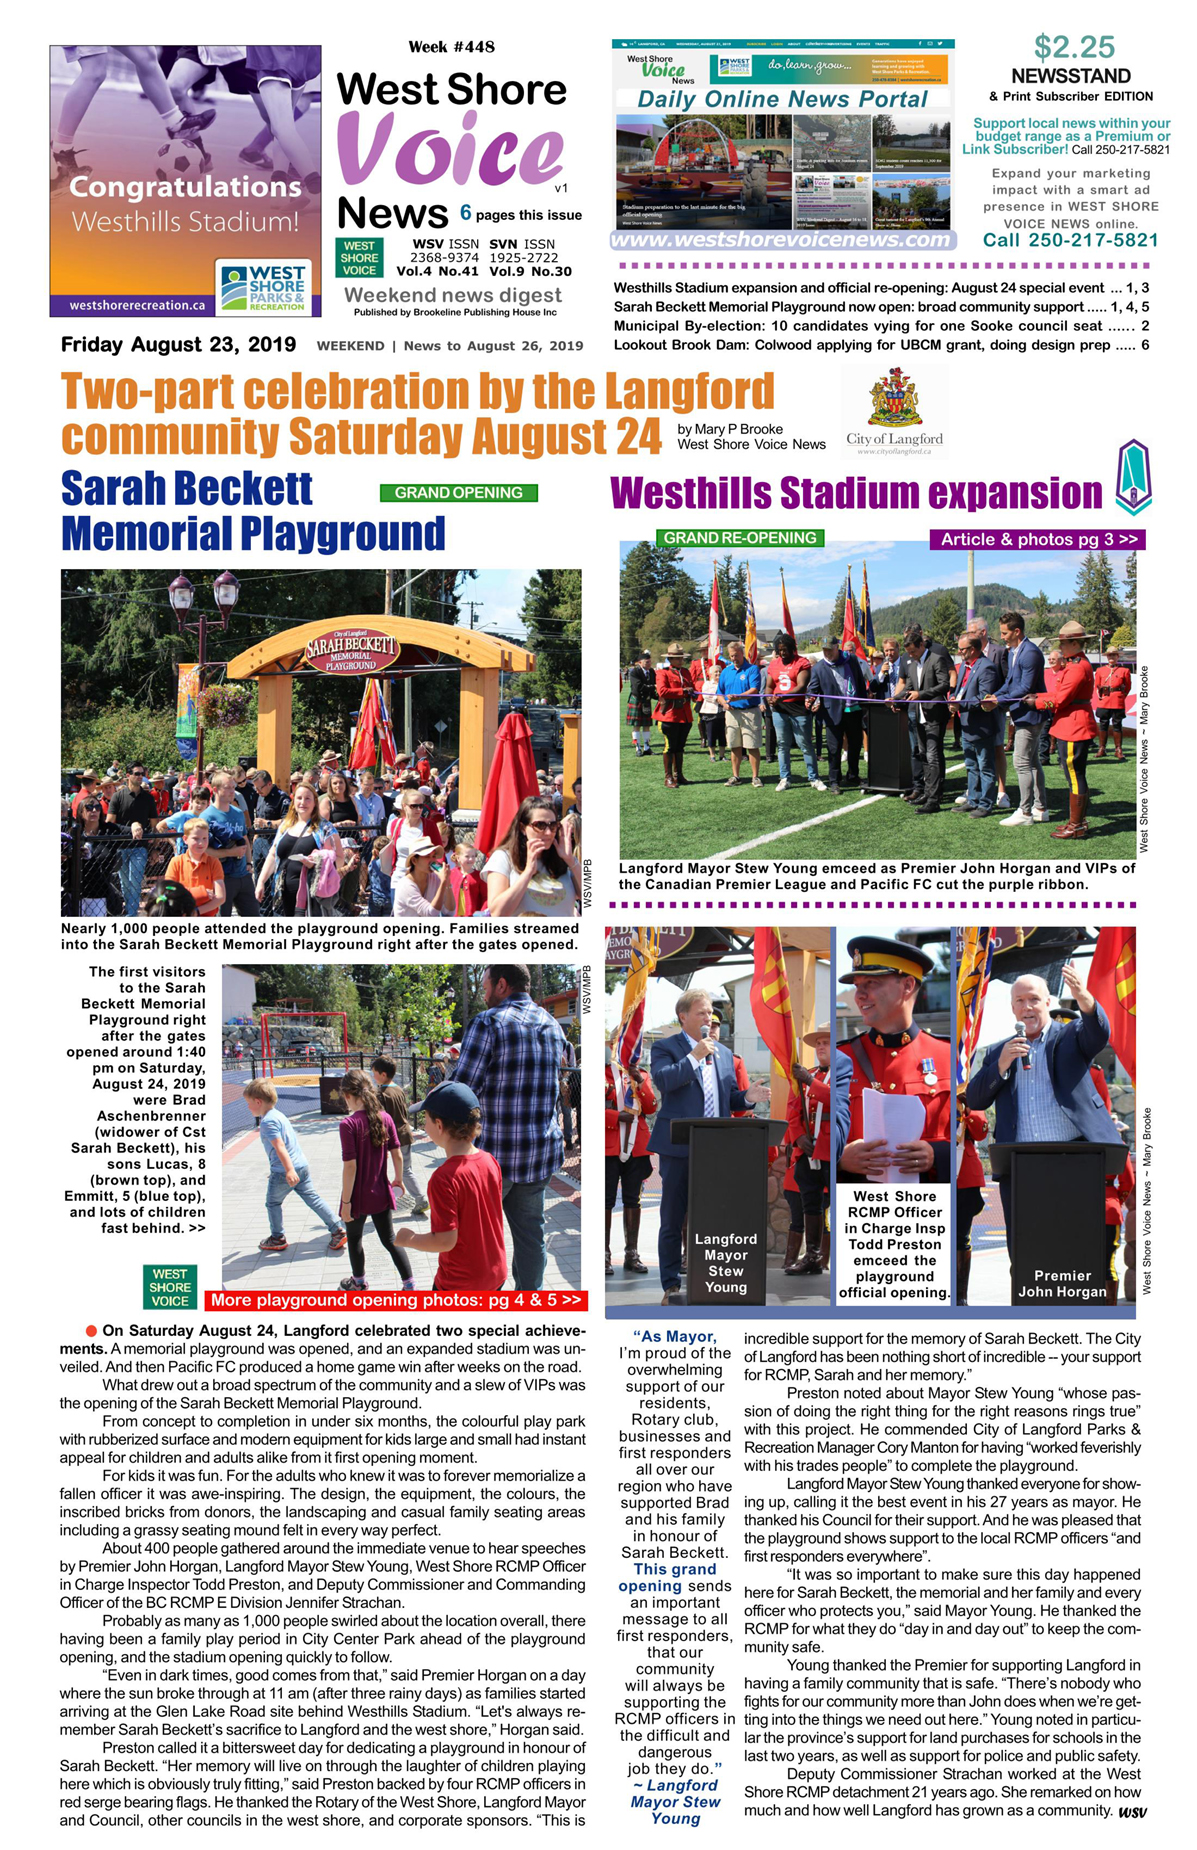 Sarah Beckett Memorial Playground, official opening, West Shore Voice News